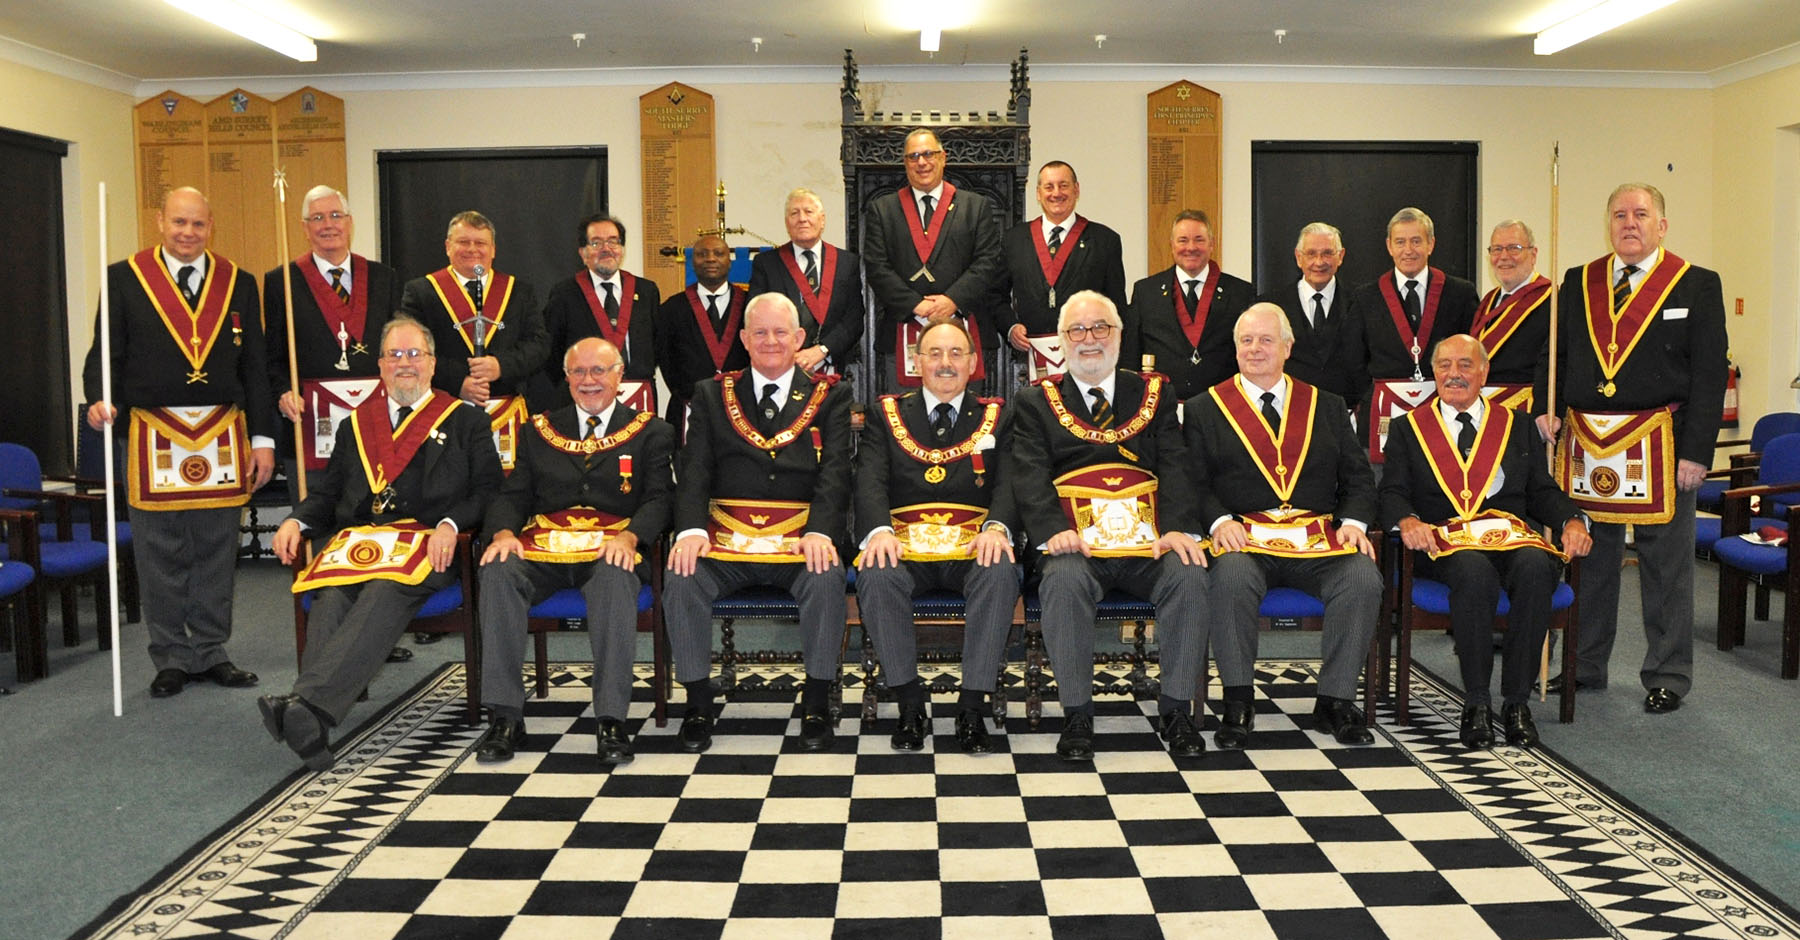 Official Visit by the Provincial Grand Master to Archbishop Æthelhelm Court No. 34